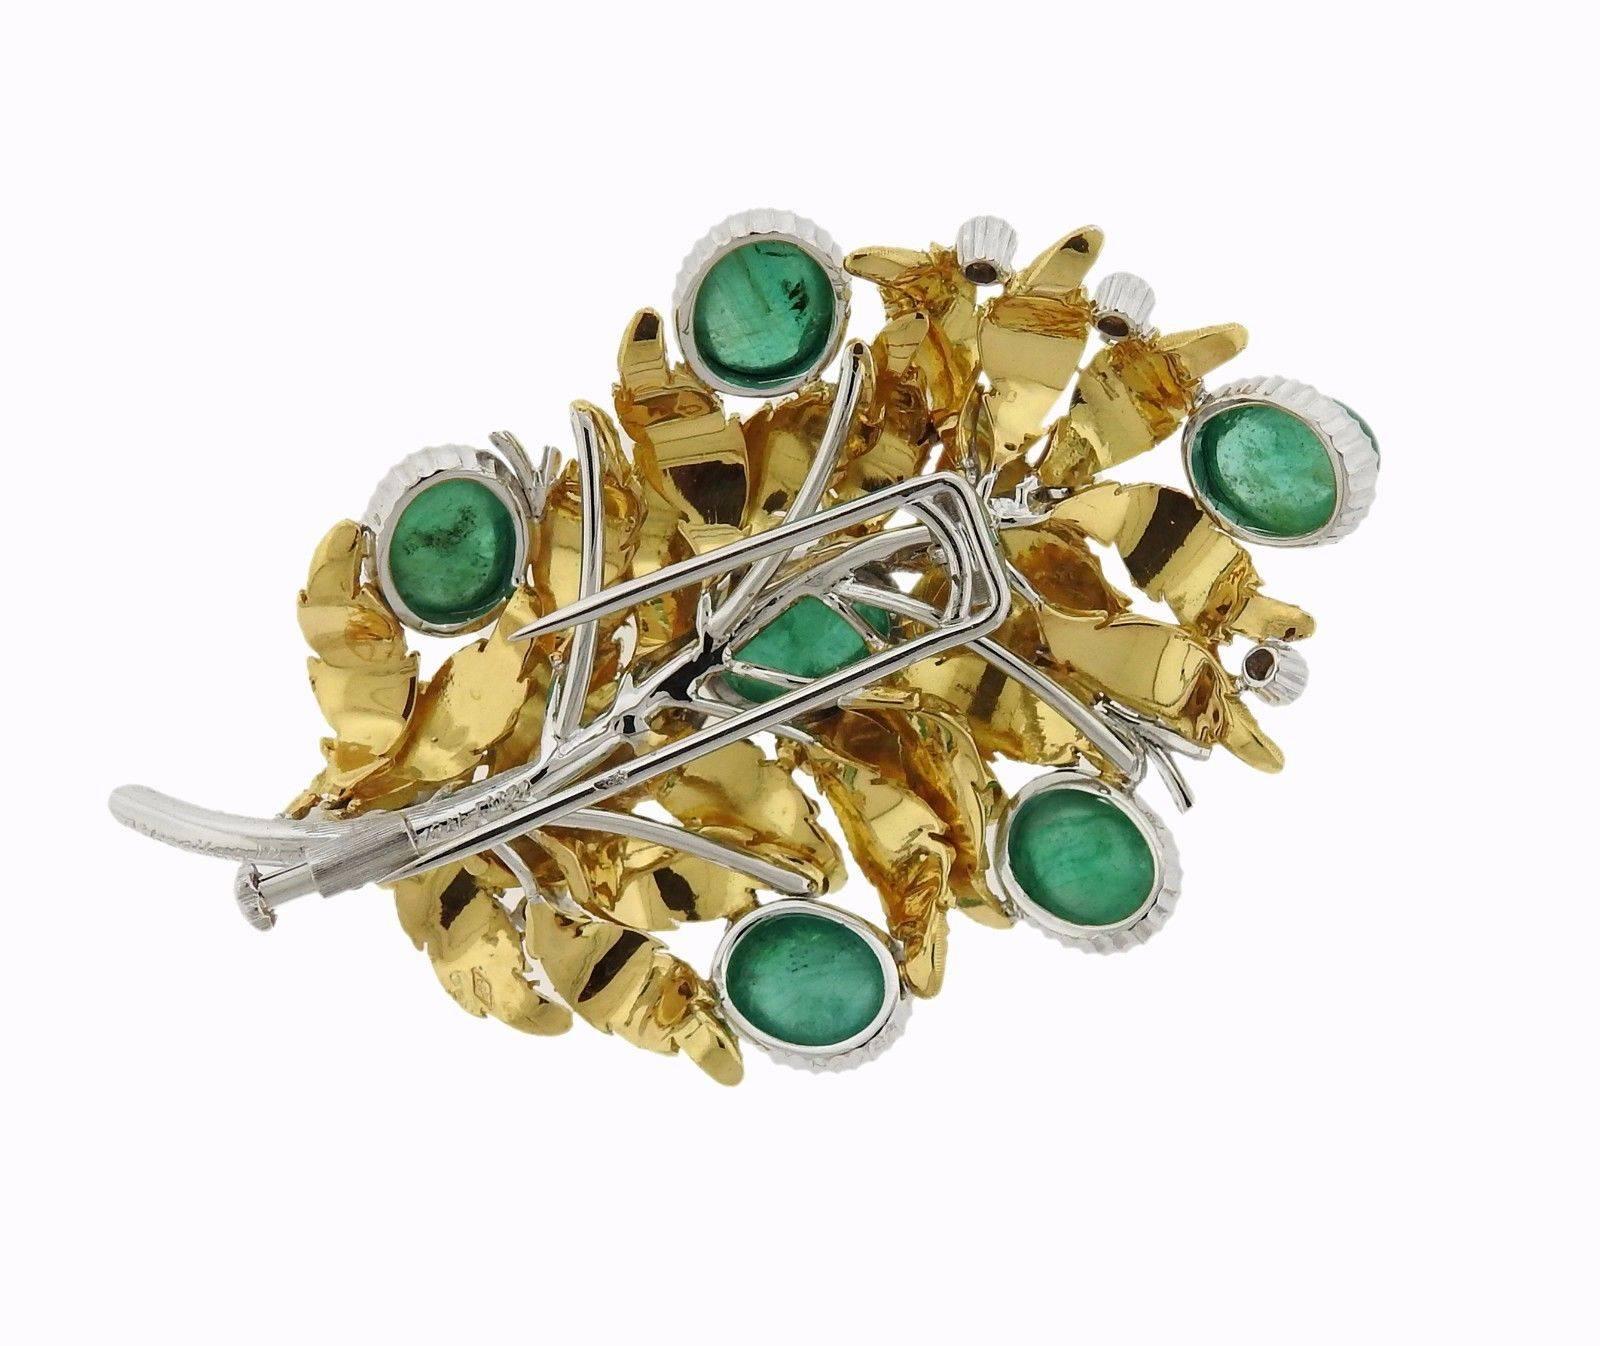 An 18k gold leaf motif brooch set with 8.87ctw of emeralds and approximately 0.50ctw of GH/VS diamonds.  The brooch measures 58mm x 38mm and weighs 27.9 grams. Marked: 18k, Italy, Buccellati.  Comes with Buccellati box and paperwork.  Retail is